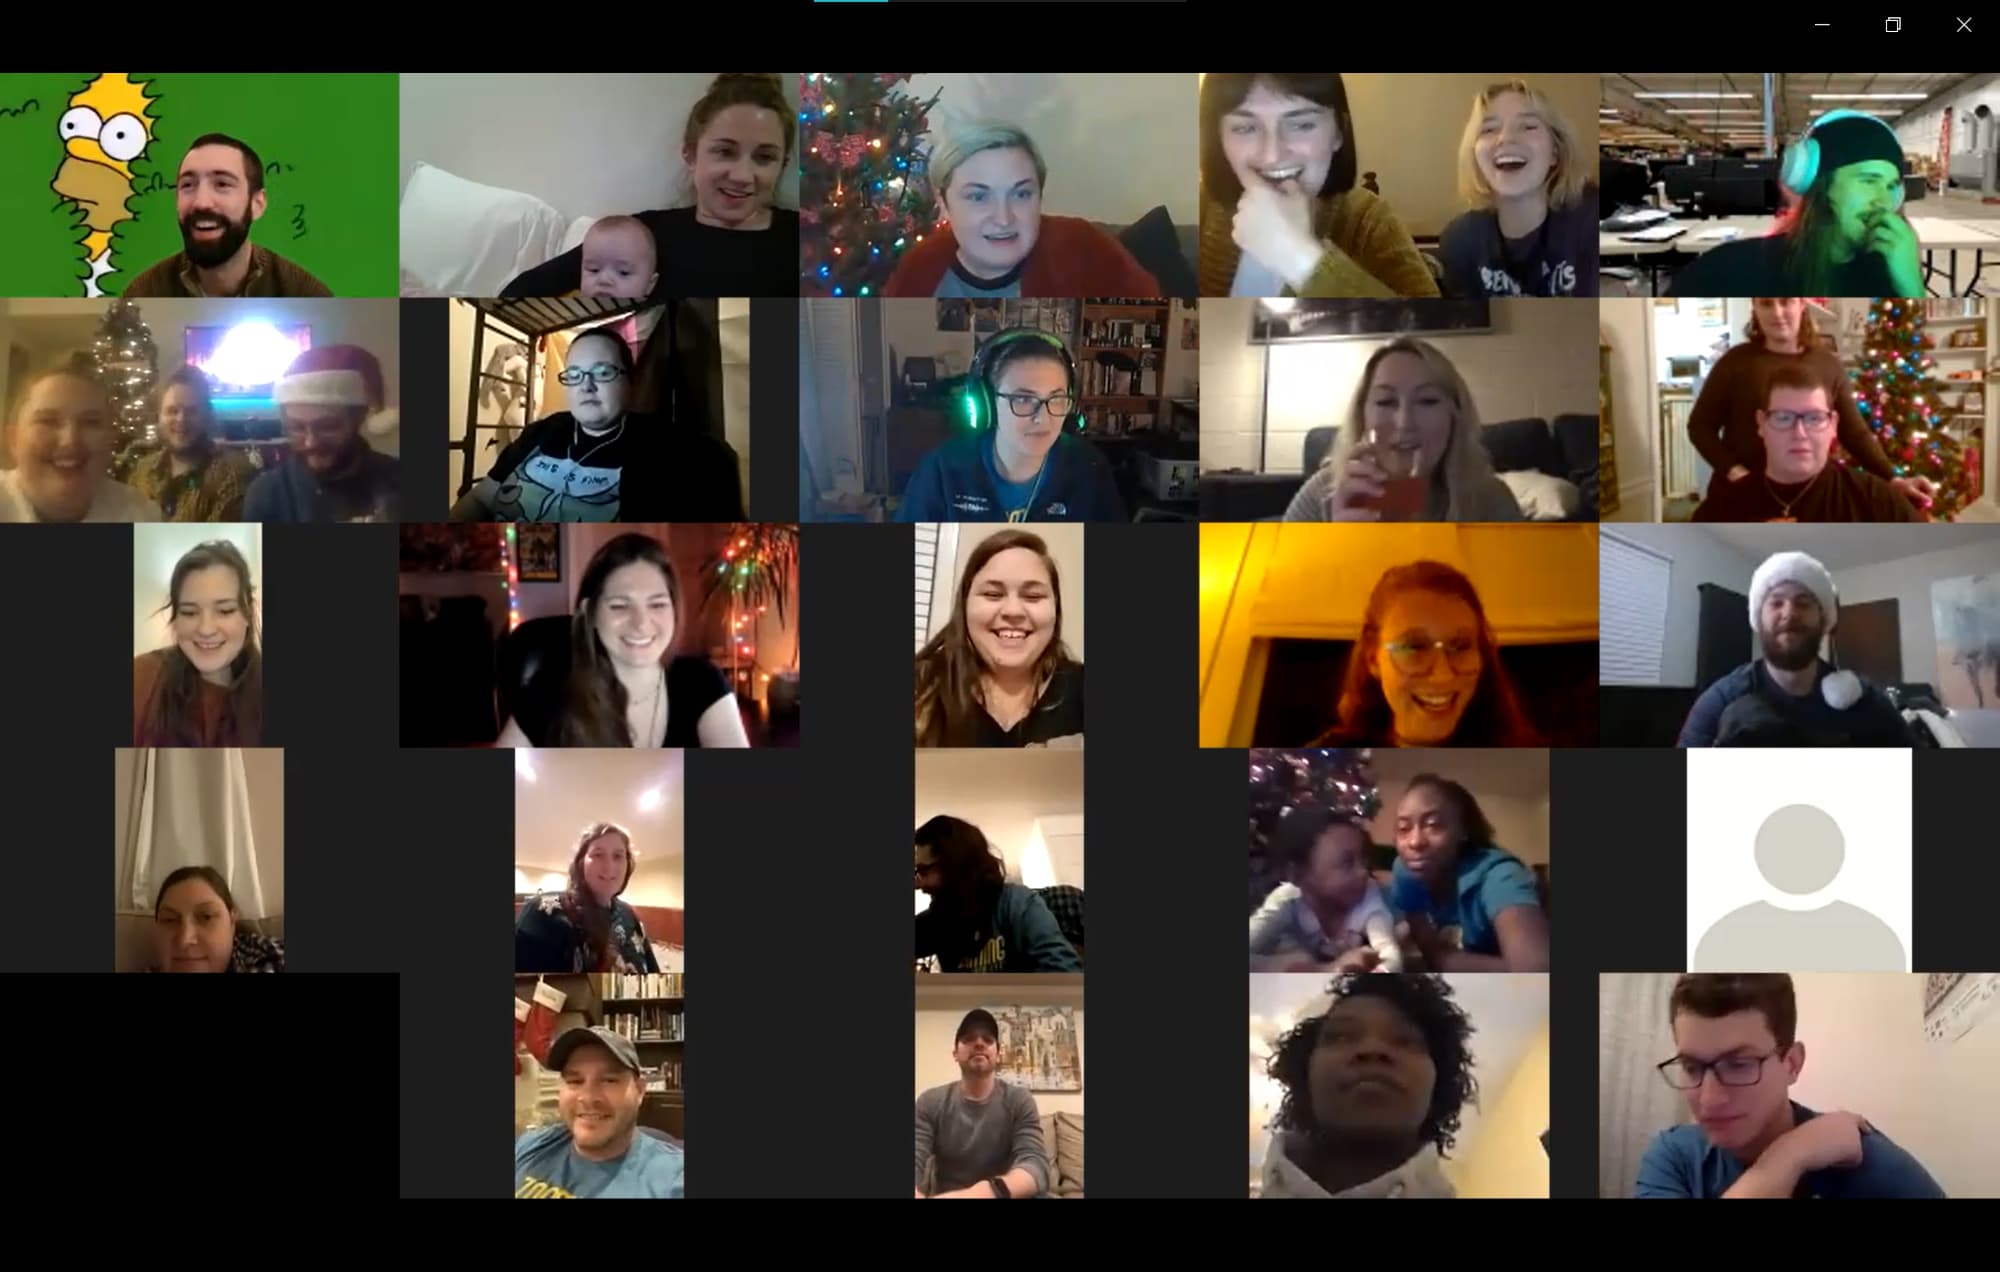 A screenshot from the UberPrints holiday Zoom call.